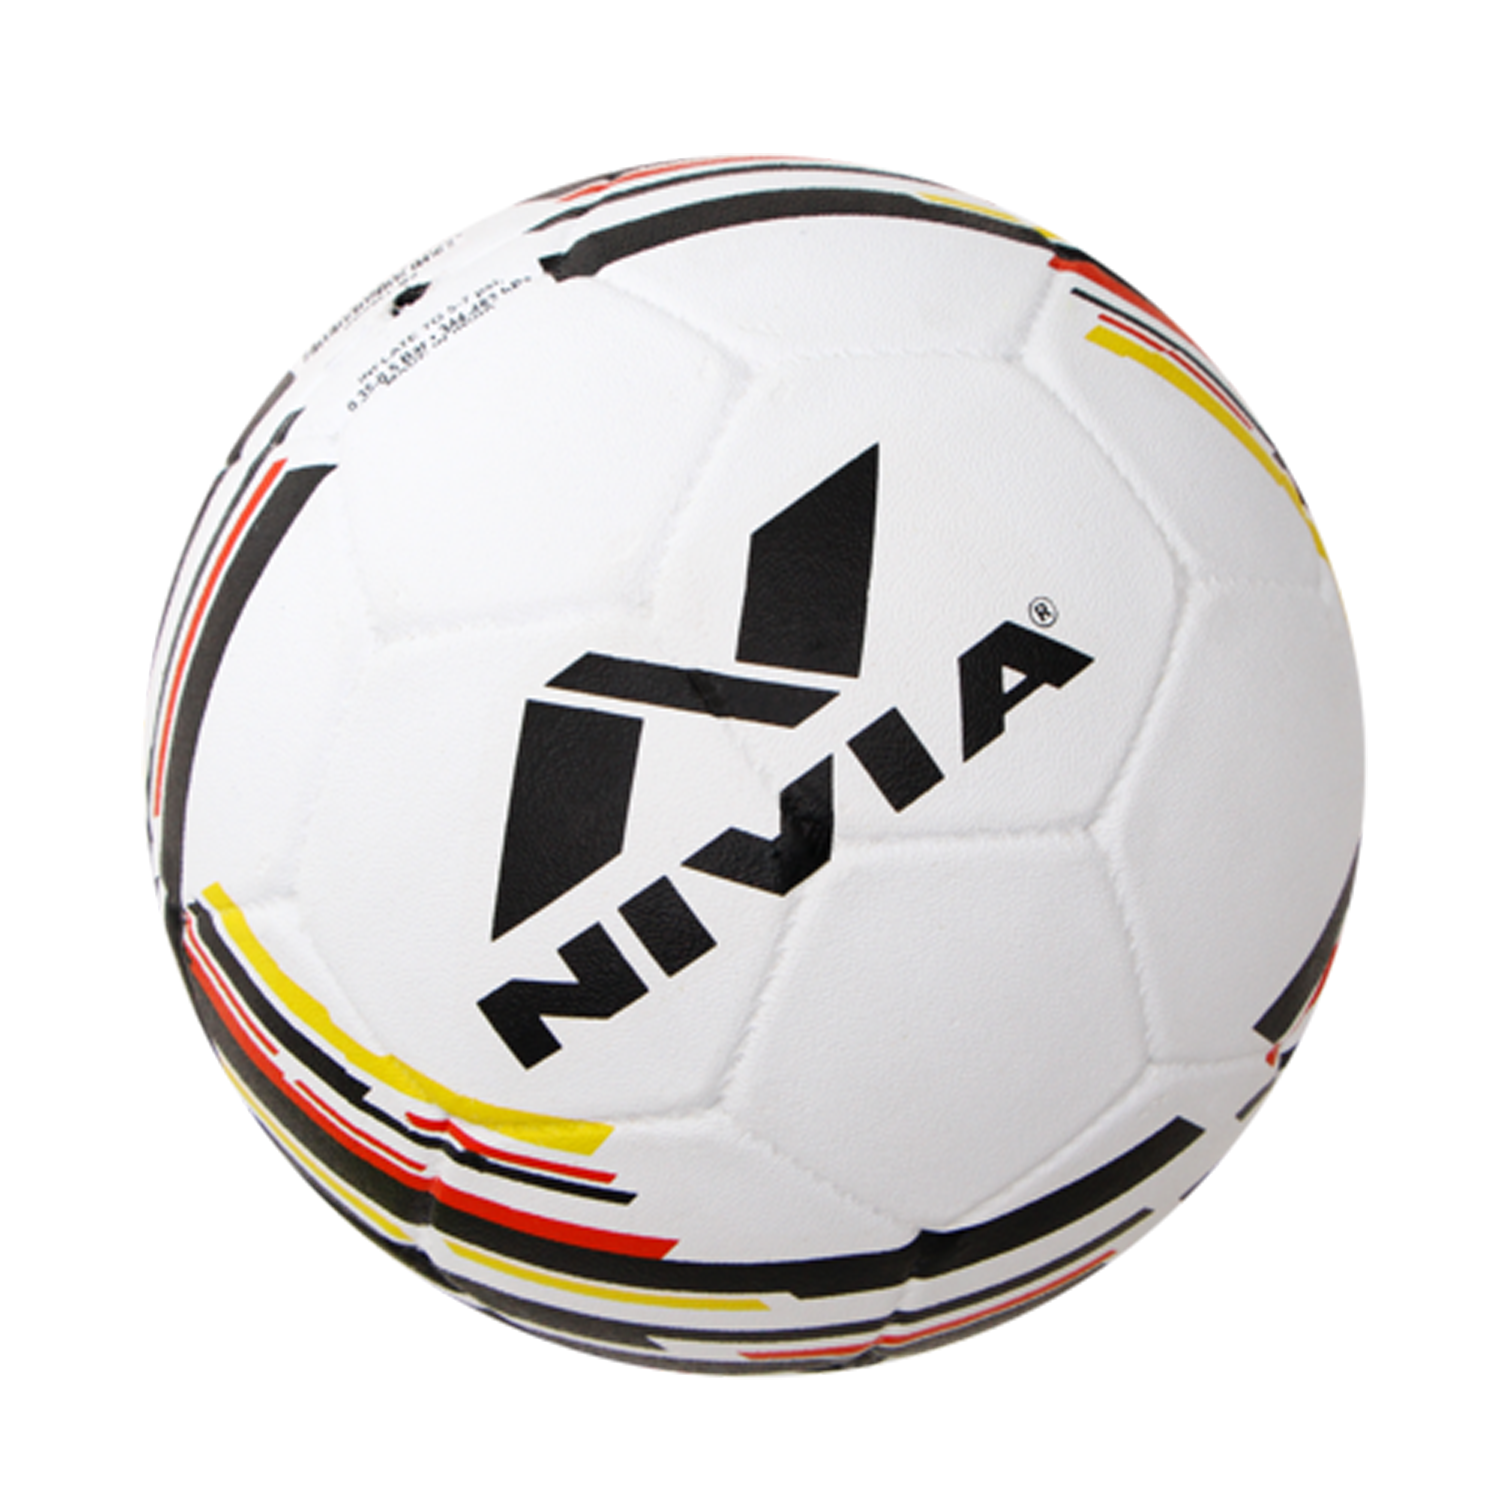 Nivia Germany Country Colour Football, Multi Colour - Size 5 - Best Price online Prokicksports.com